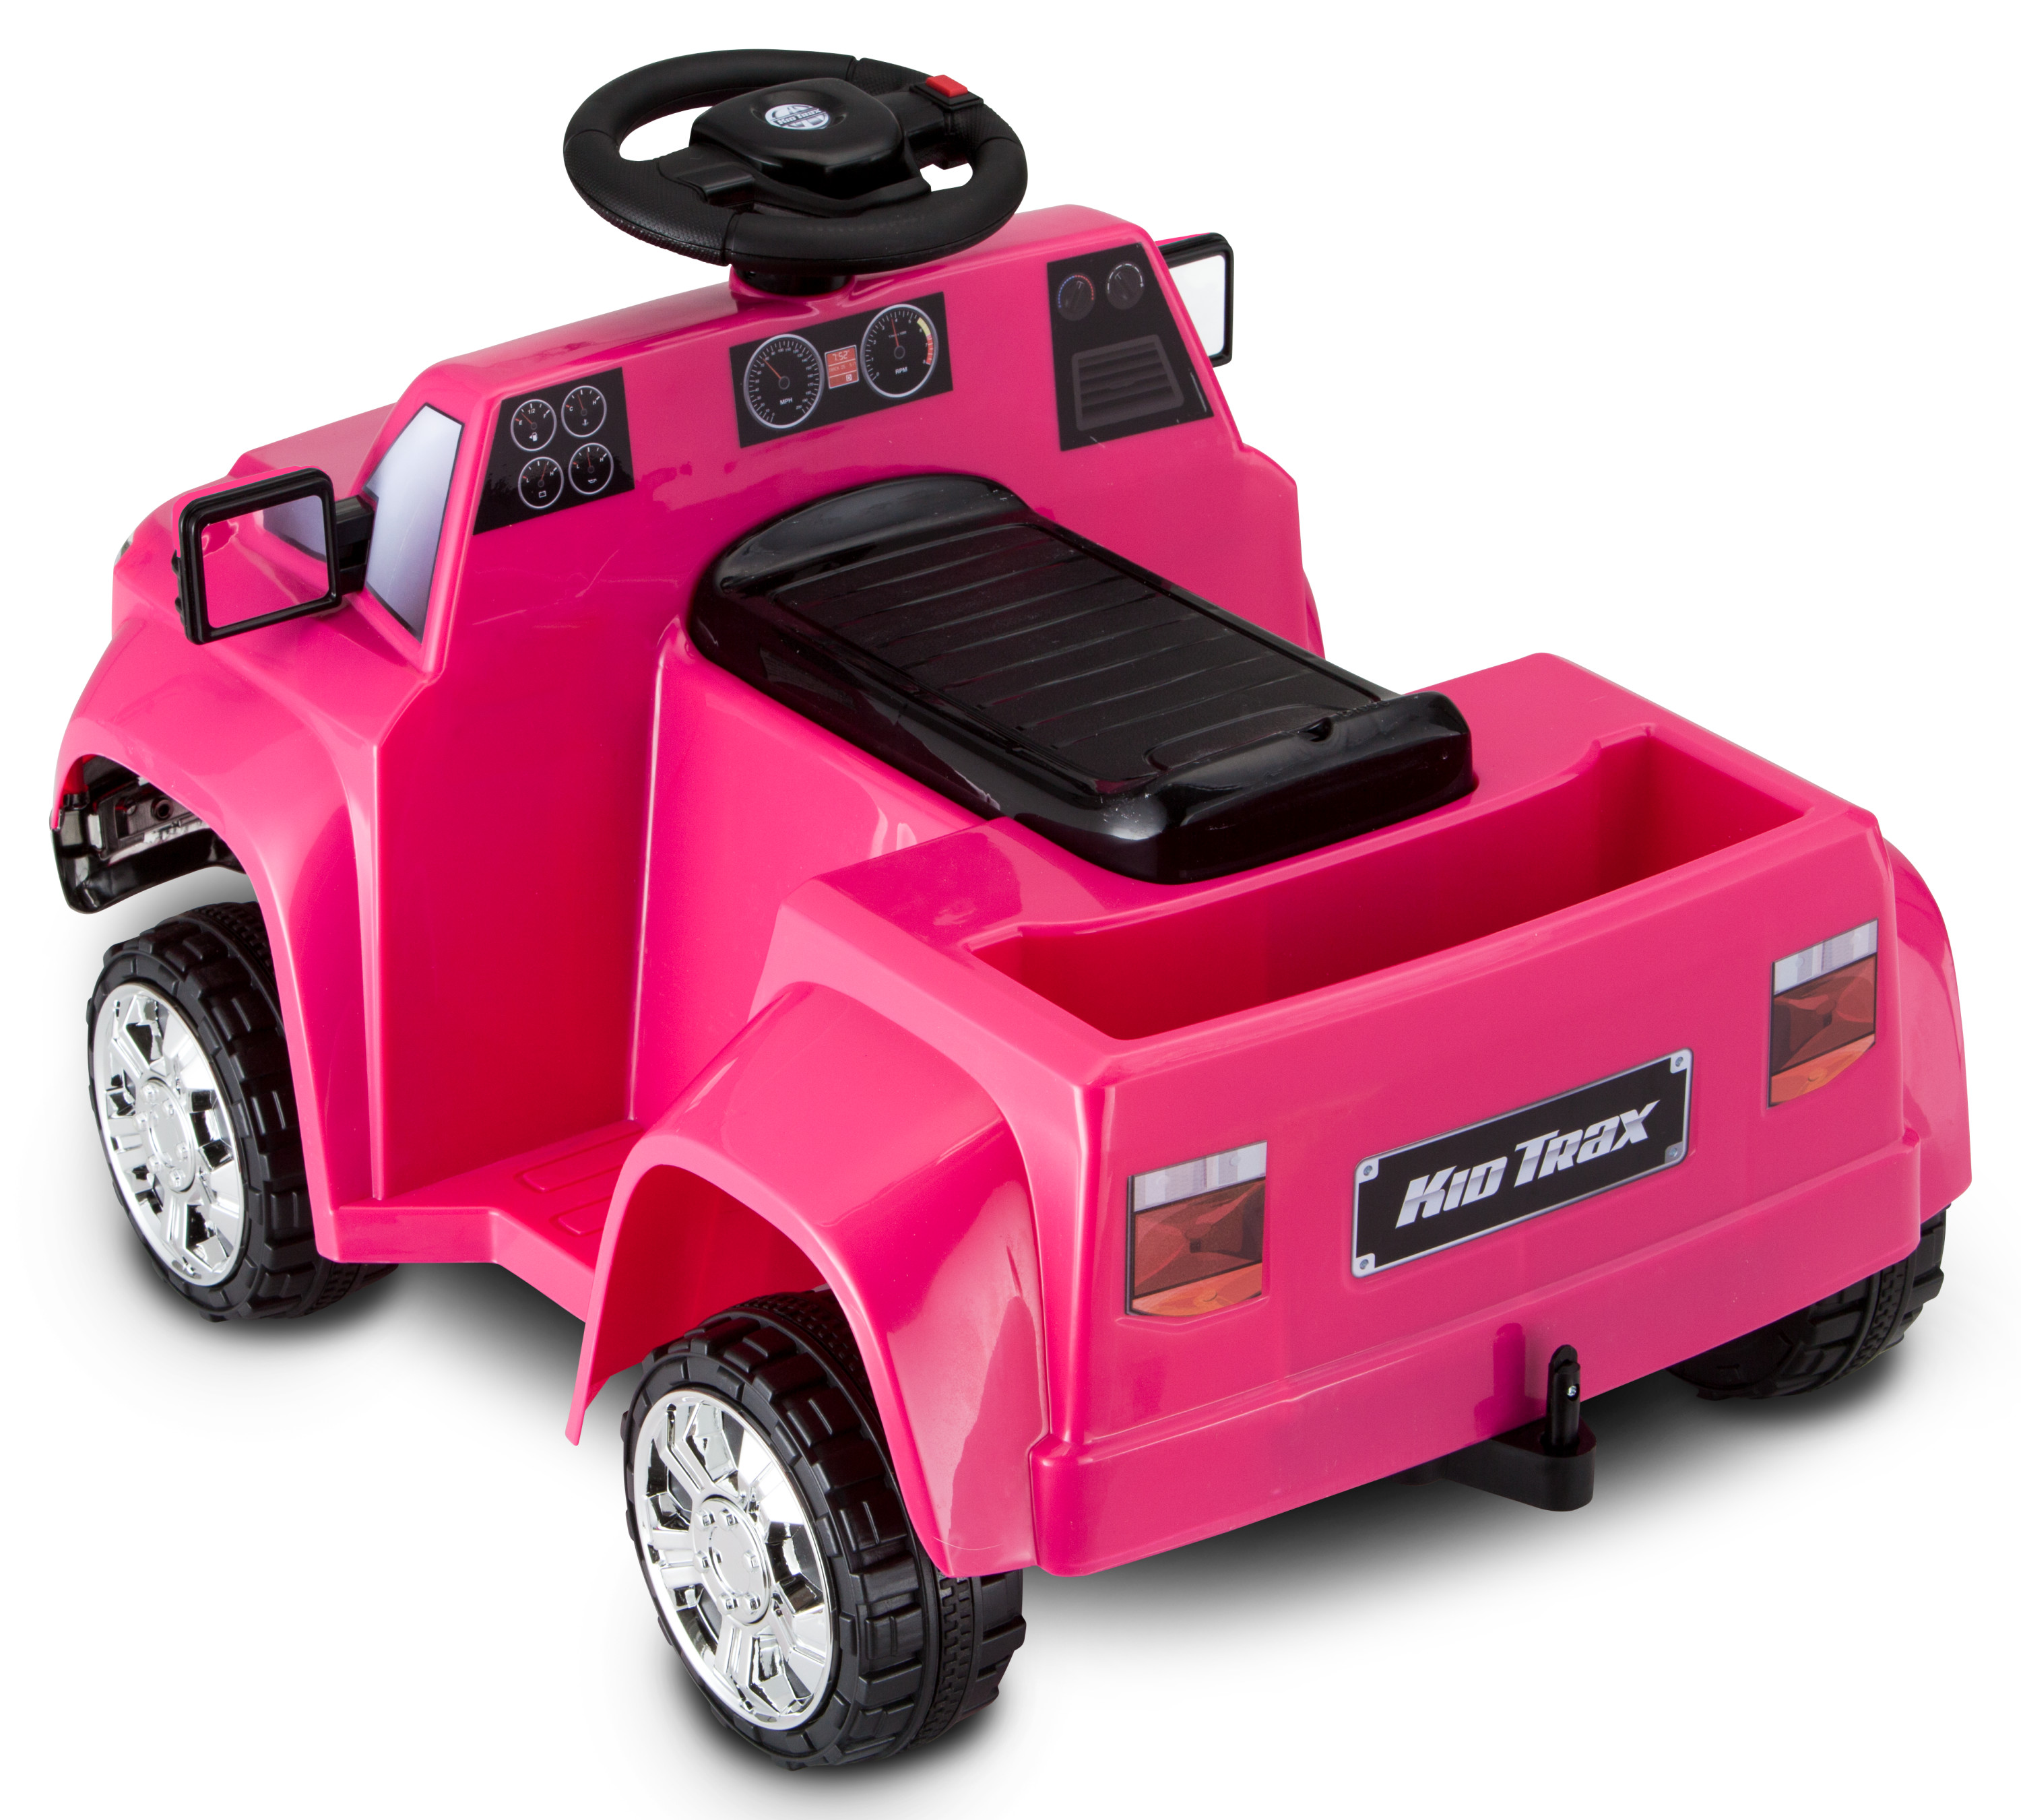 Heavy Hauling Truck with Trailer Toddler Ride-On Toy by Kid Trax, pink - image 3 of 8